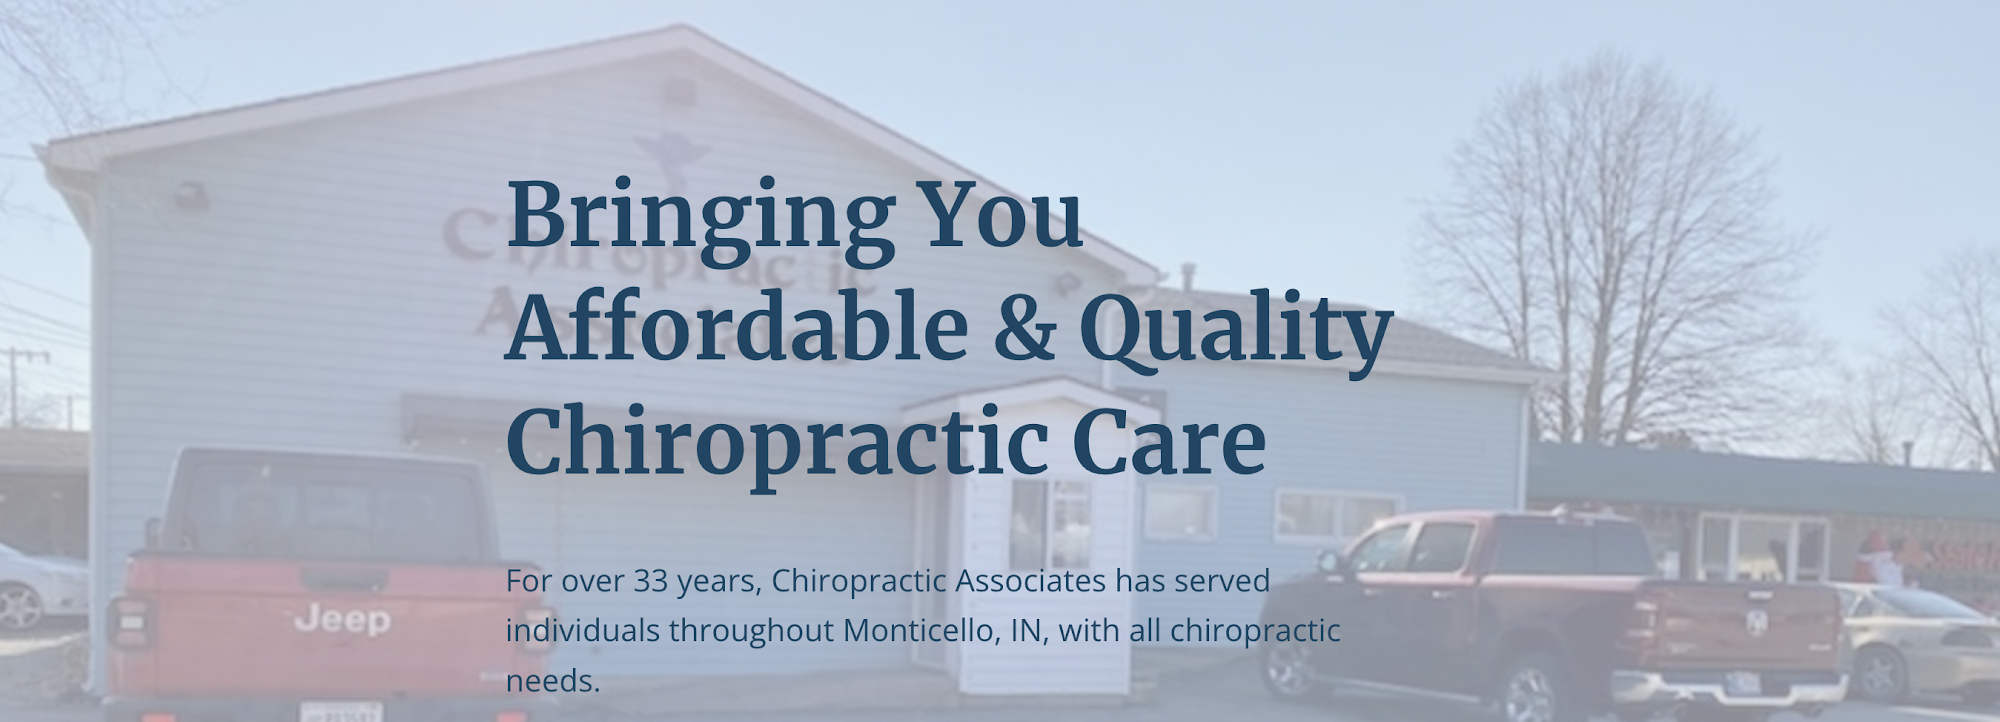 Chiropractic Associates 221 W Broadway St, Monticello Indiana 47960